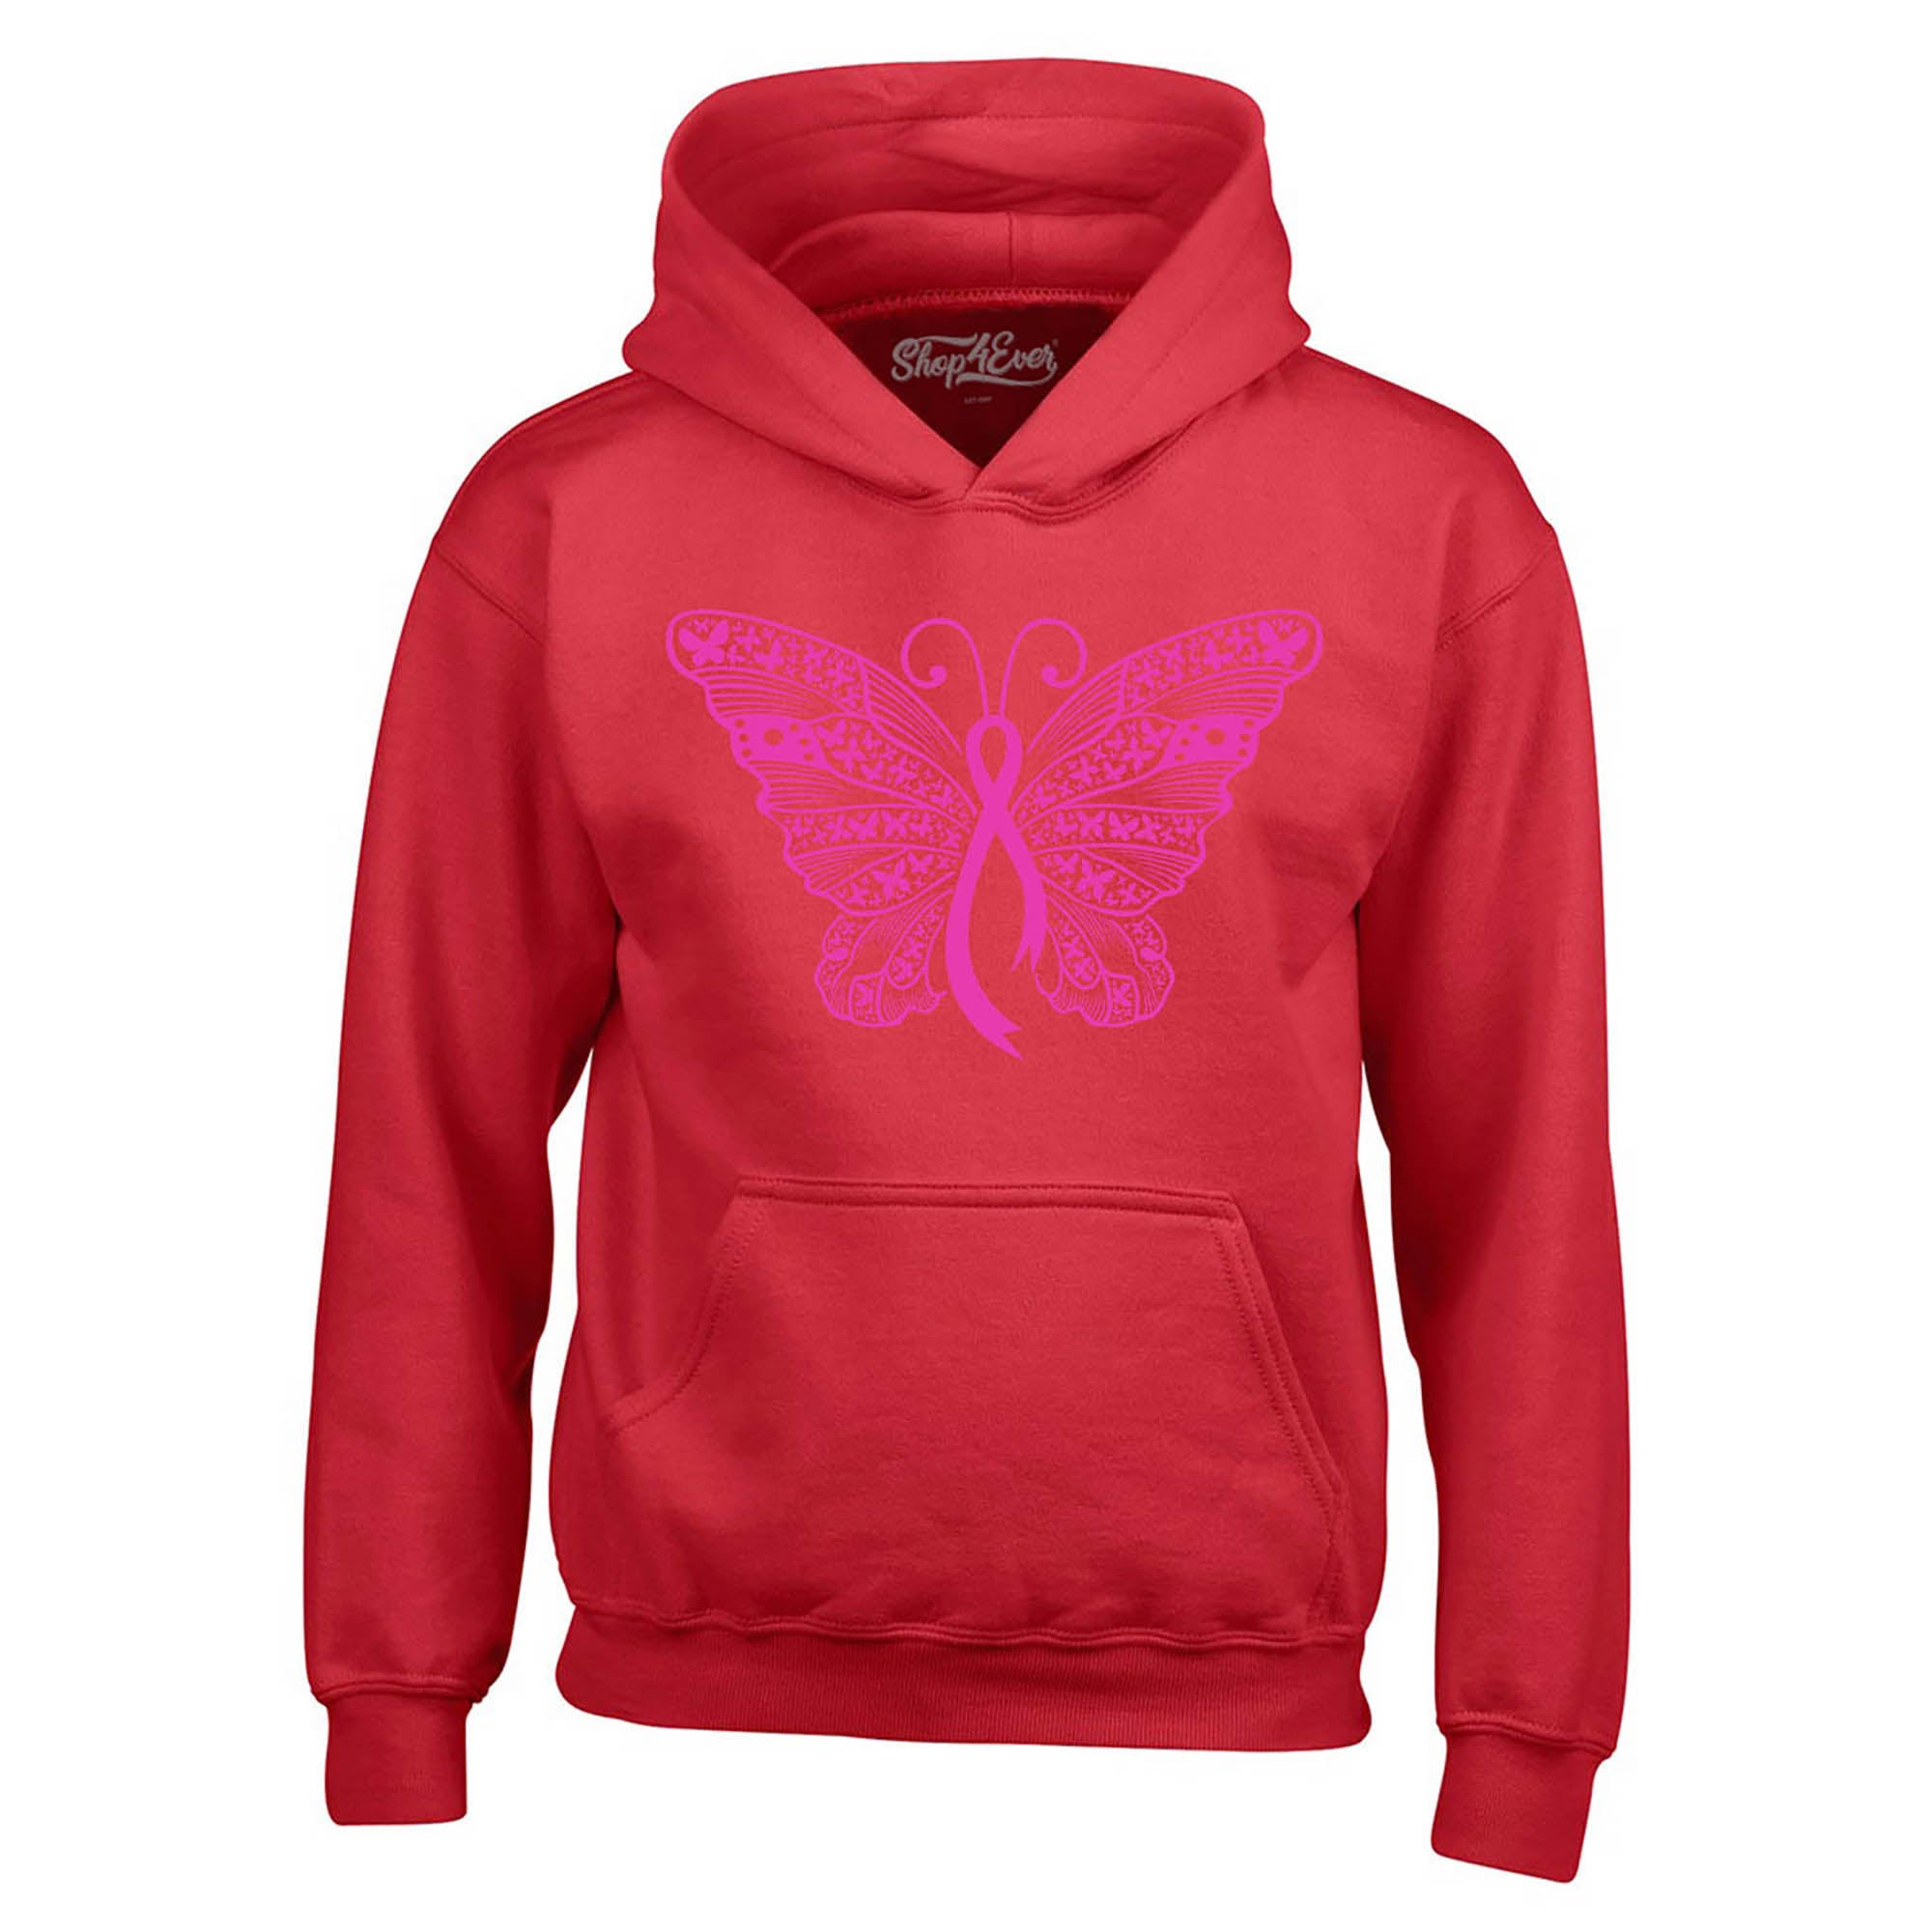 Pink Ribbon Butterfly Breast Cancer Awareness Hoodie Sweatshirts